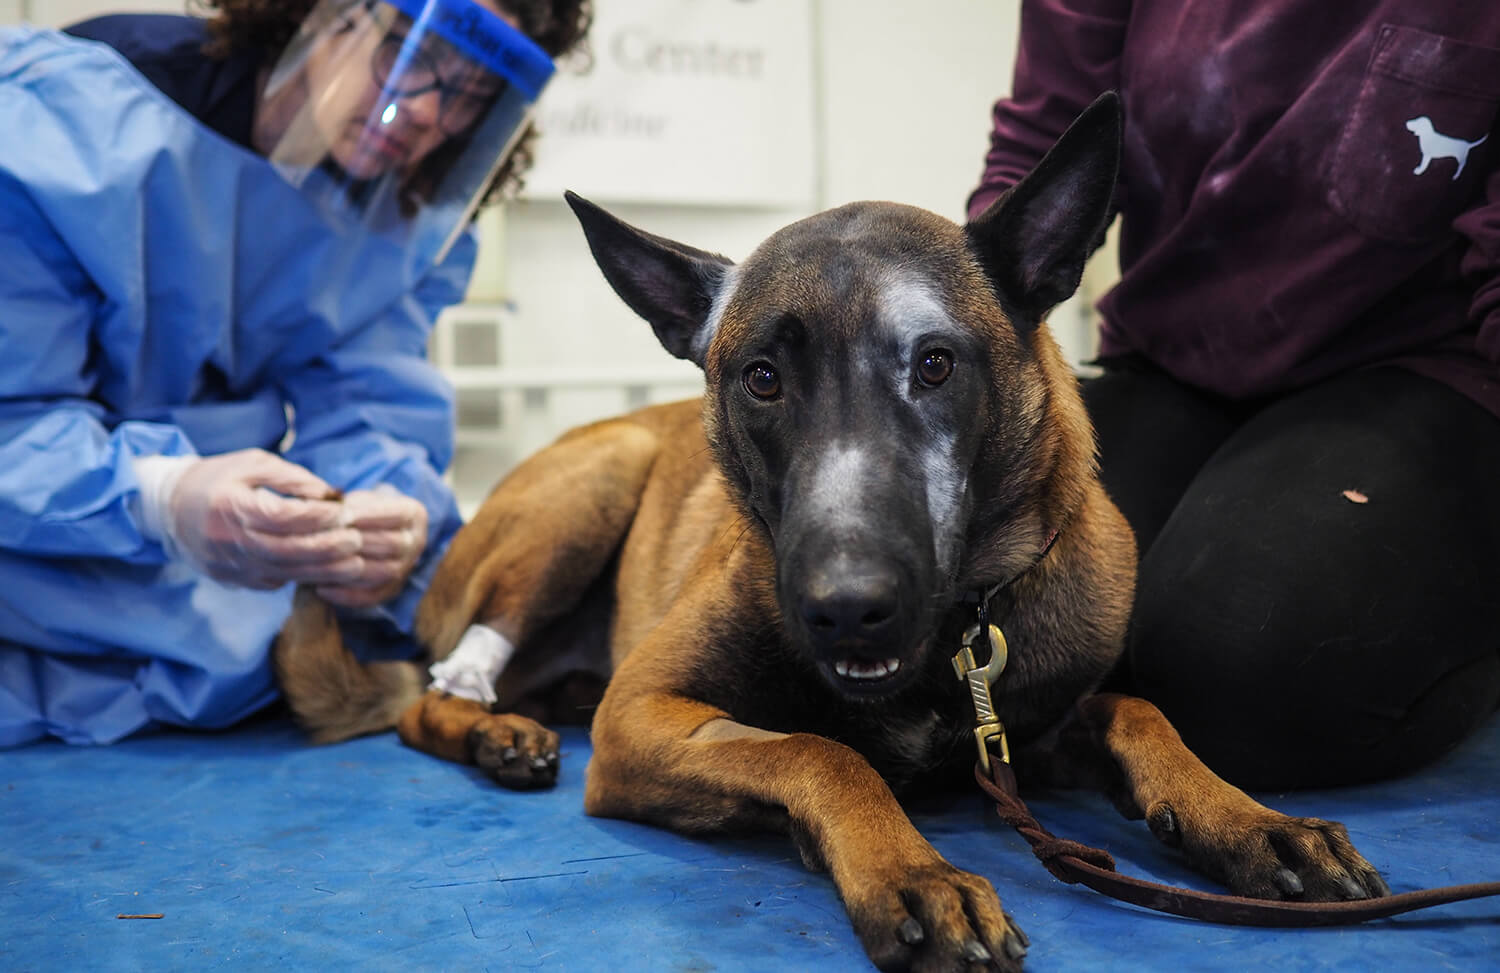 A chance encounter with opioids is a real risk for police dogs. Otto led research investigating how to keep these dogs safe on the job. (Image: Tracy Darling/Superfit Canine)